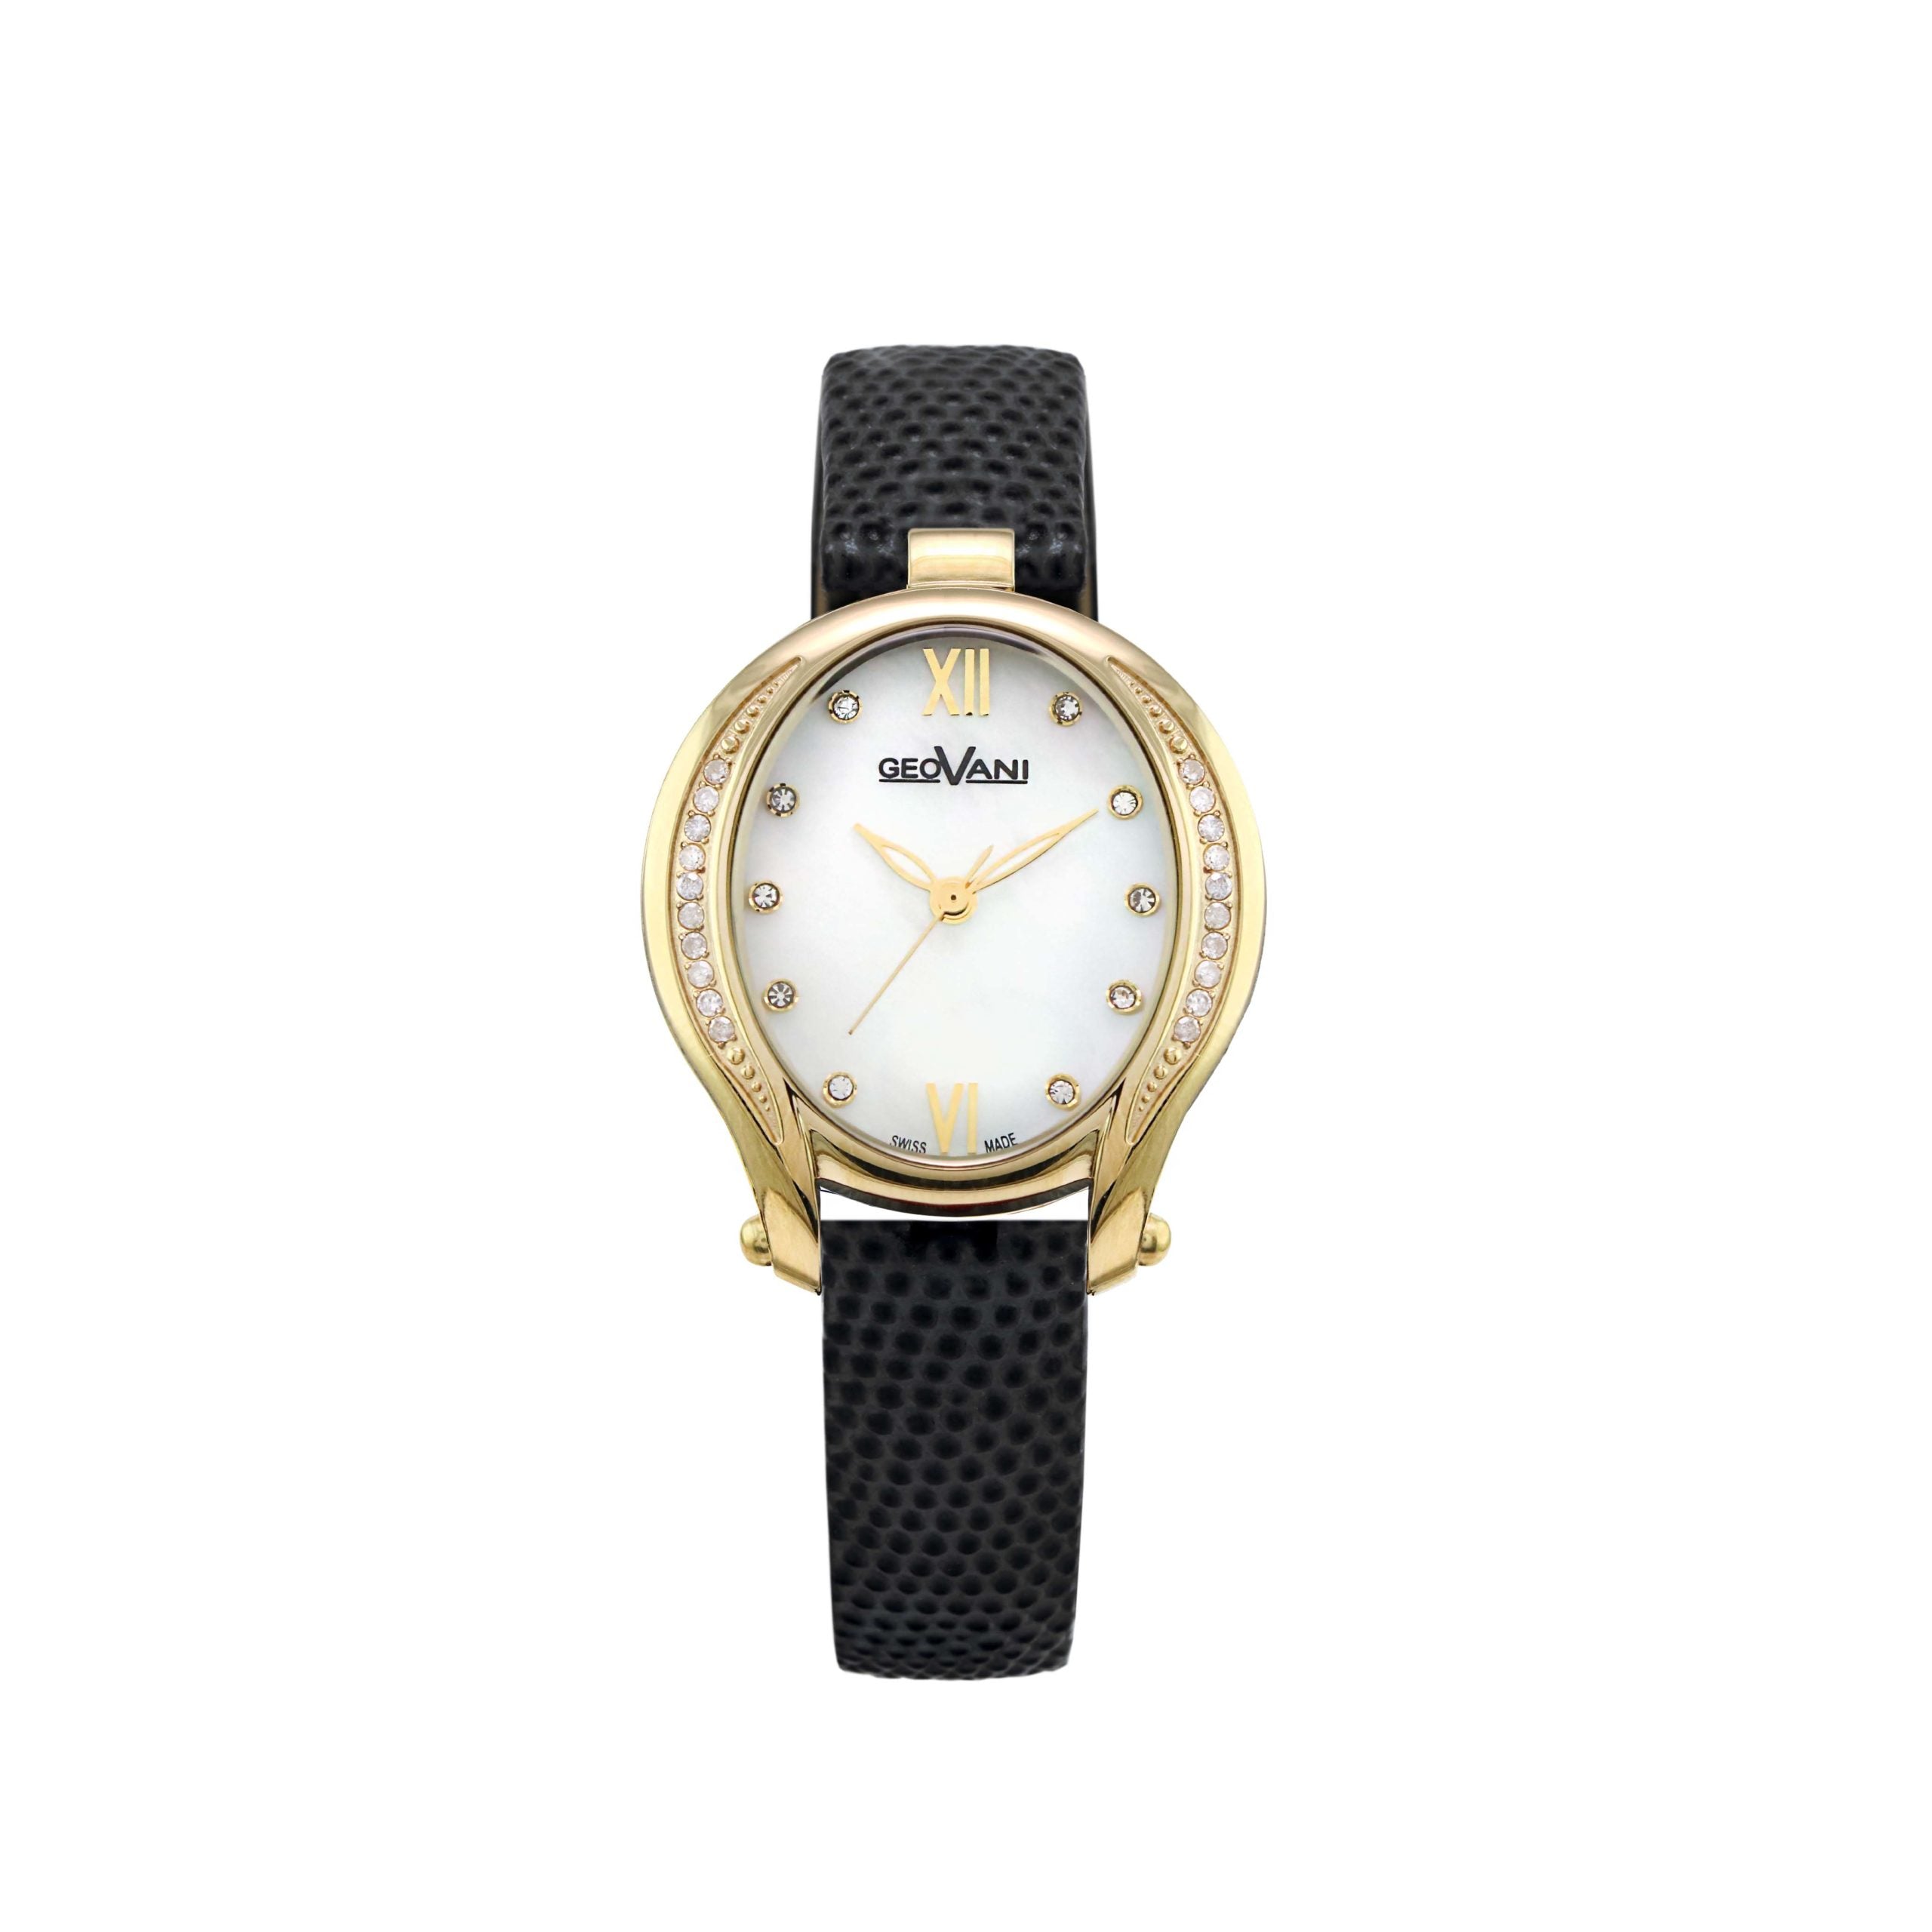 Giovanni Women's Swiss Quartz Watch with Pearly White Dial - GEO-0021